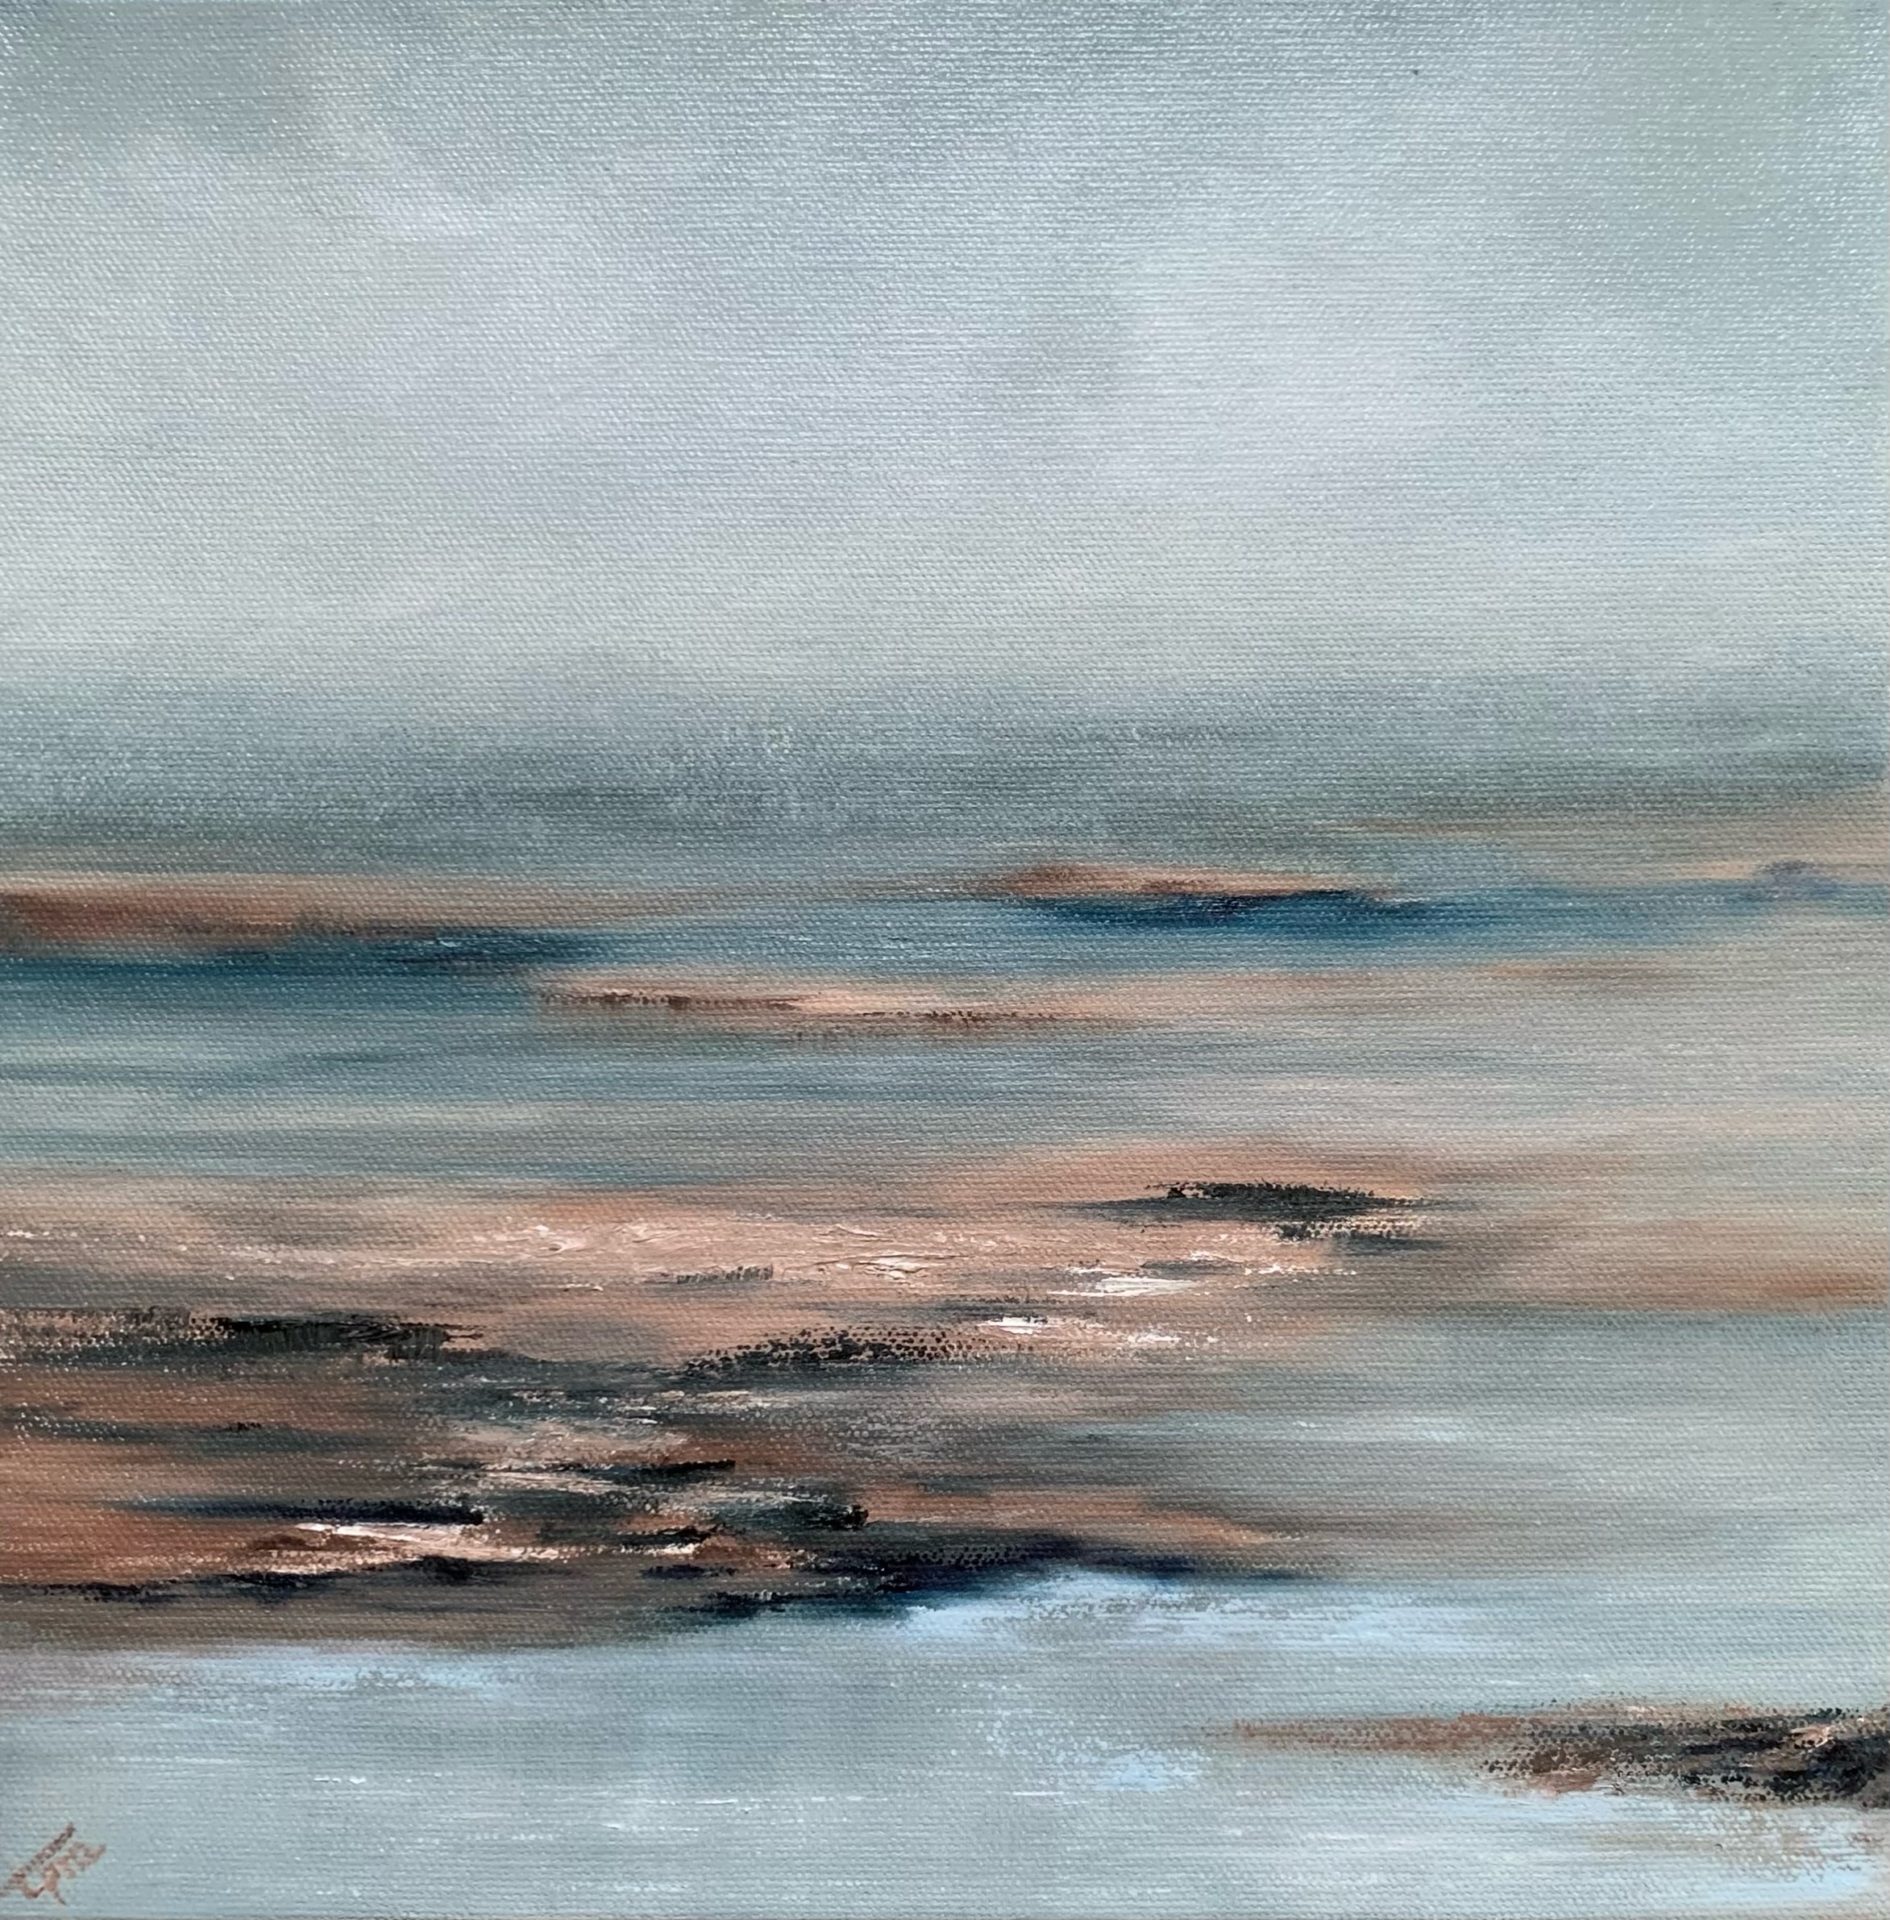 Photo of original seascape oil painting by Tisha Mark, "Tide Pools II" 12"x12 oil on canvas (2022). Seascape painting in cool blues and grays with contrasting warm tones of brown featuring textures found in tide pools during a wintertime visit to a beach.